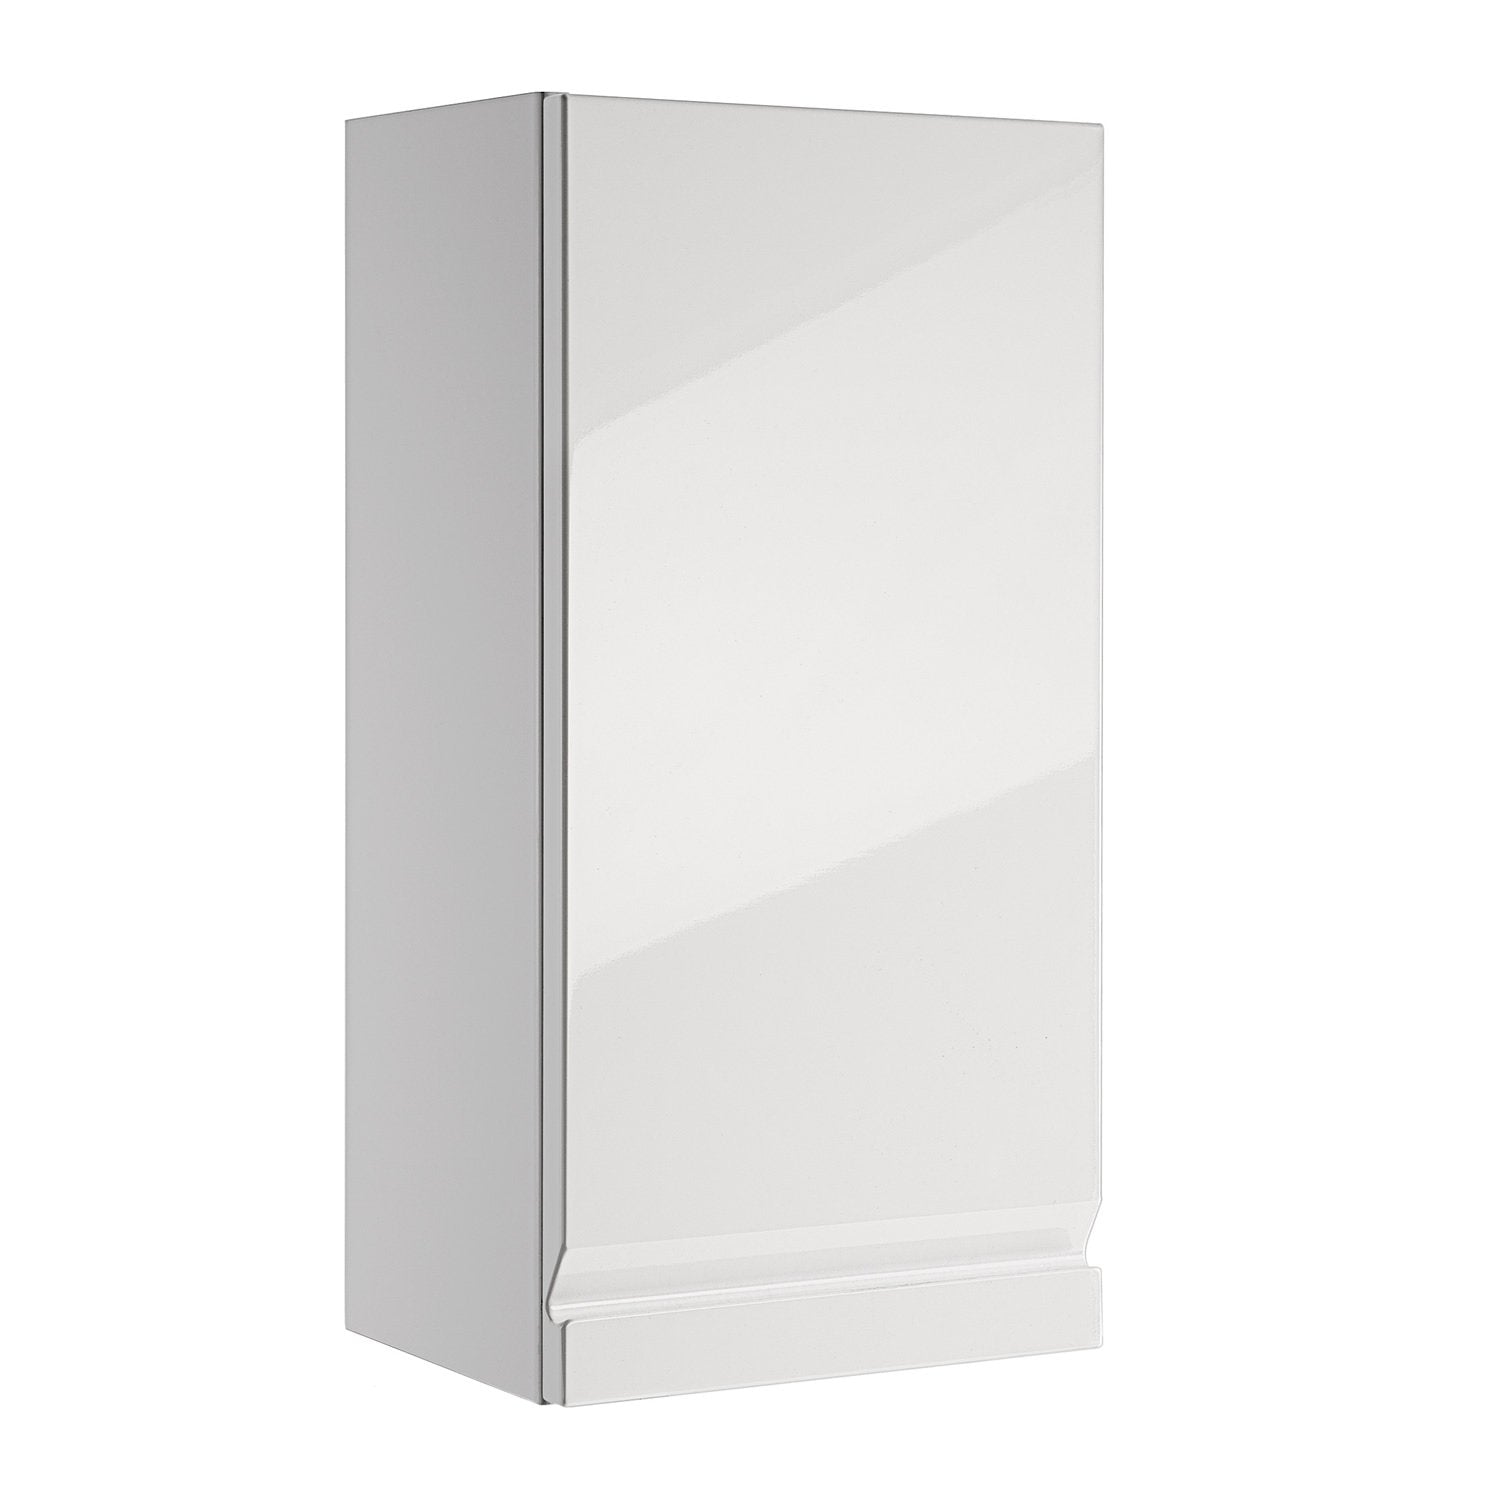 16" Small Side Cabinet, Wall Mount, 1 Door whit Soft Close and Right Opening, White, Serie Solco by VALENZUELA